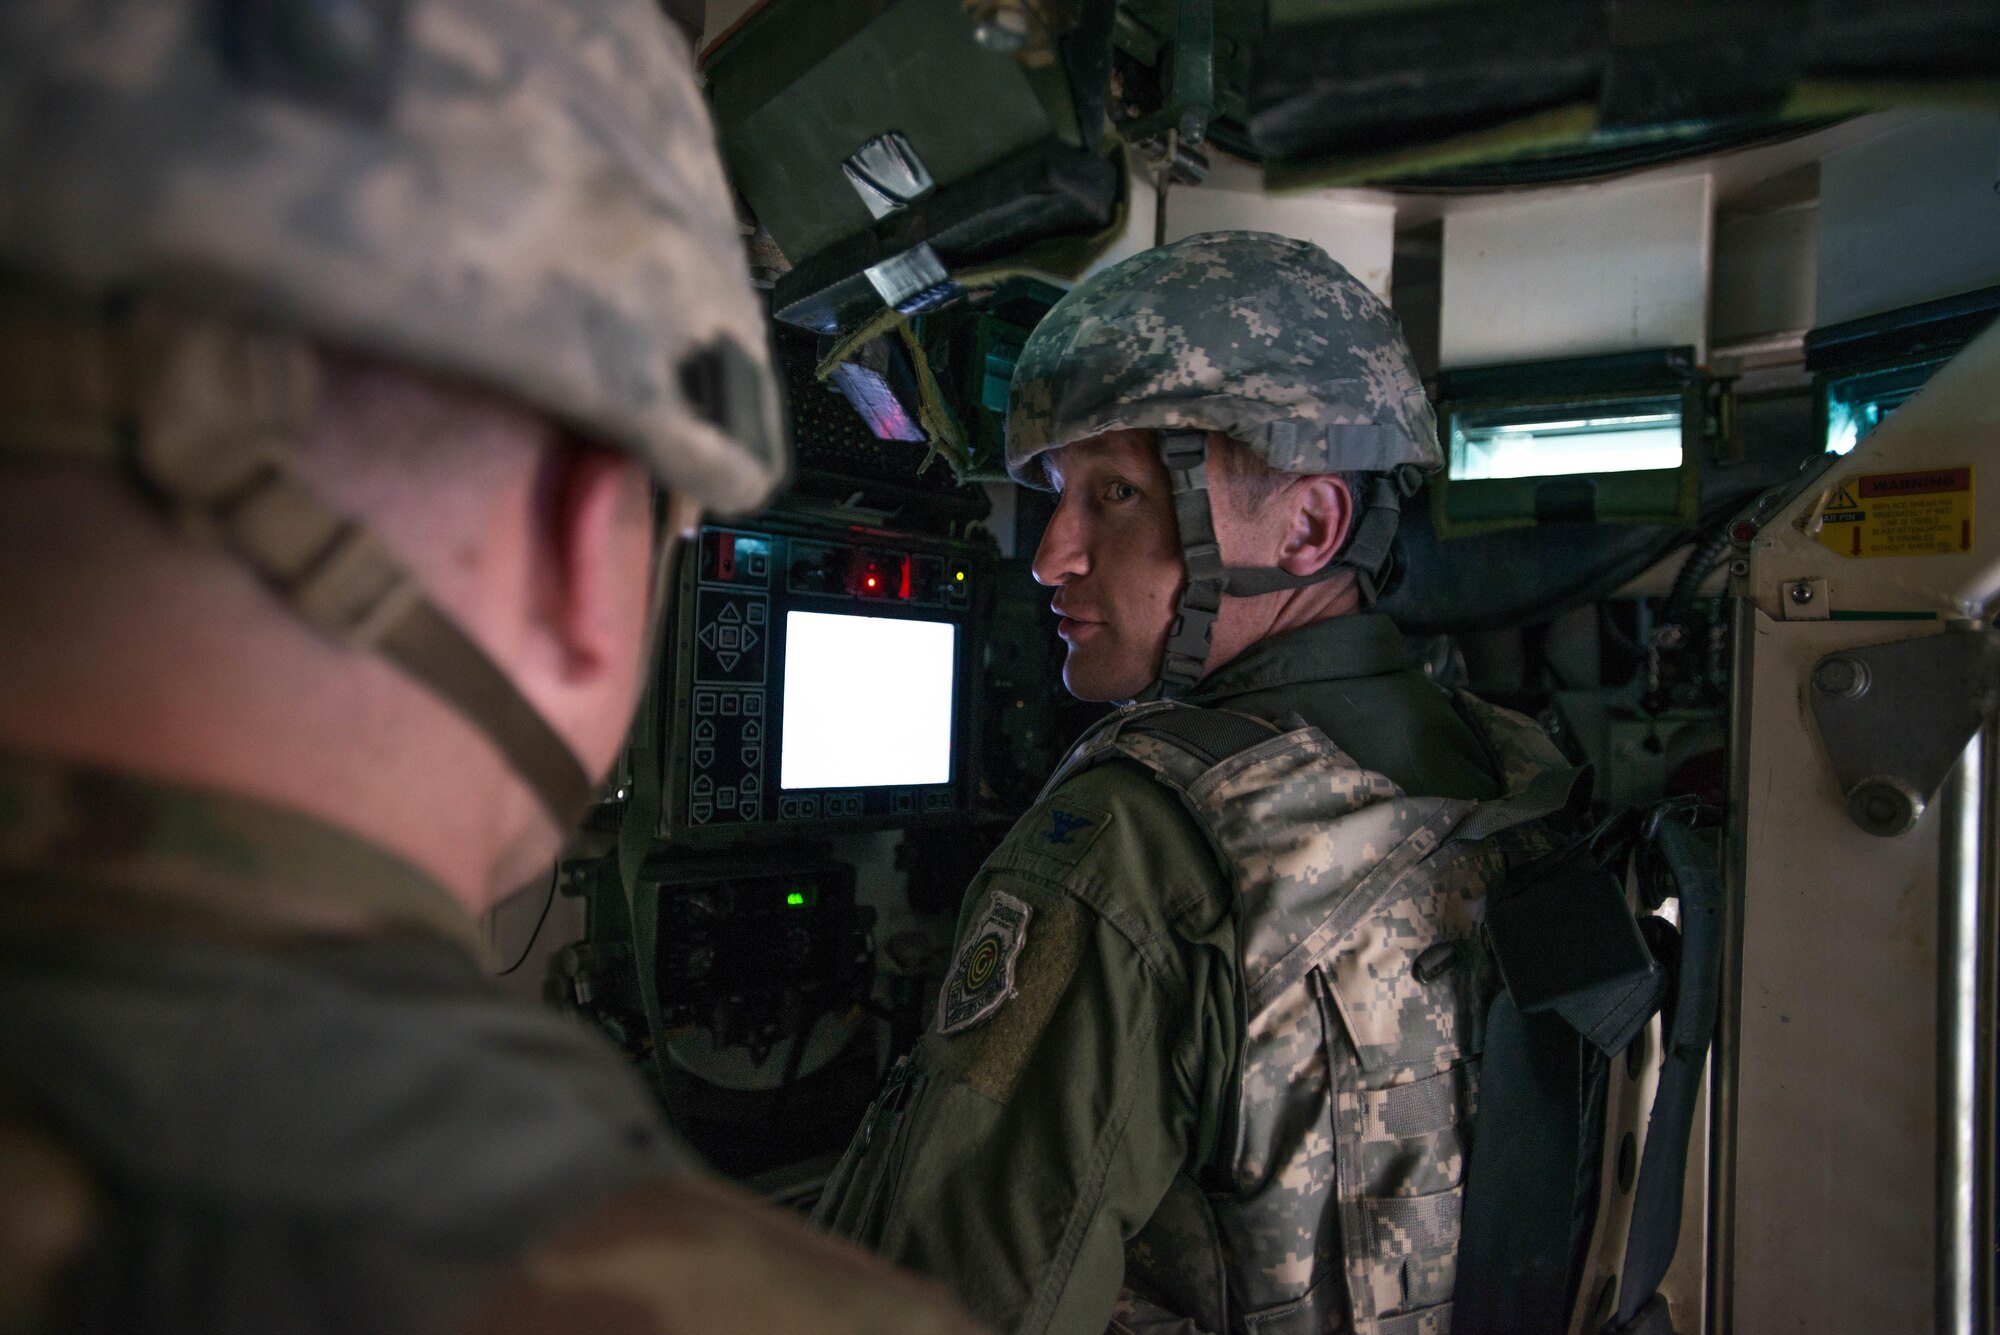 U.S. Air Force Col. Patrick McAtee, the Virginia Air National Guard’s 192nd Operations Group commander out of Joint Base Langley-Eustis, Va., serving on temporary duty as the deployed forces commander for RED FLAG-Alaska 16-2, sits in the remote control gunning station inside an M1126 Stryker Combat Vehicle while visiting the Joint Pacific Alaska Range Complex, June 8, 2016, during RED FLAG-Alaska (RF-A) 16-2. RF-A provides unique opportunities to integrate various forces into joint, coalition and multilateral training from simulated forward operating bases. (U.S. Air Force photo by Staff Sgt. Shawn Nickel/Released)